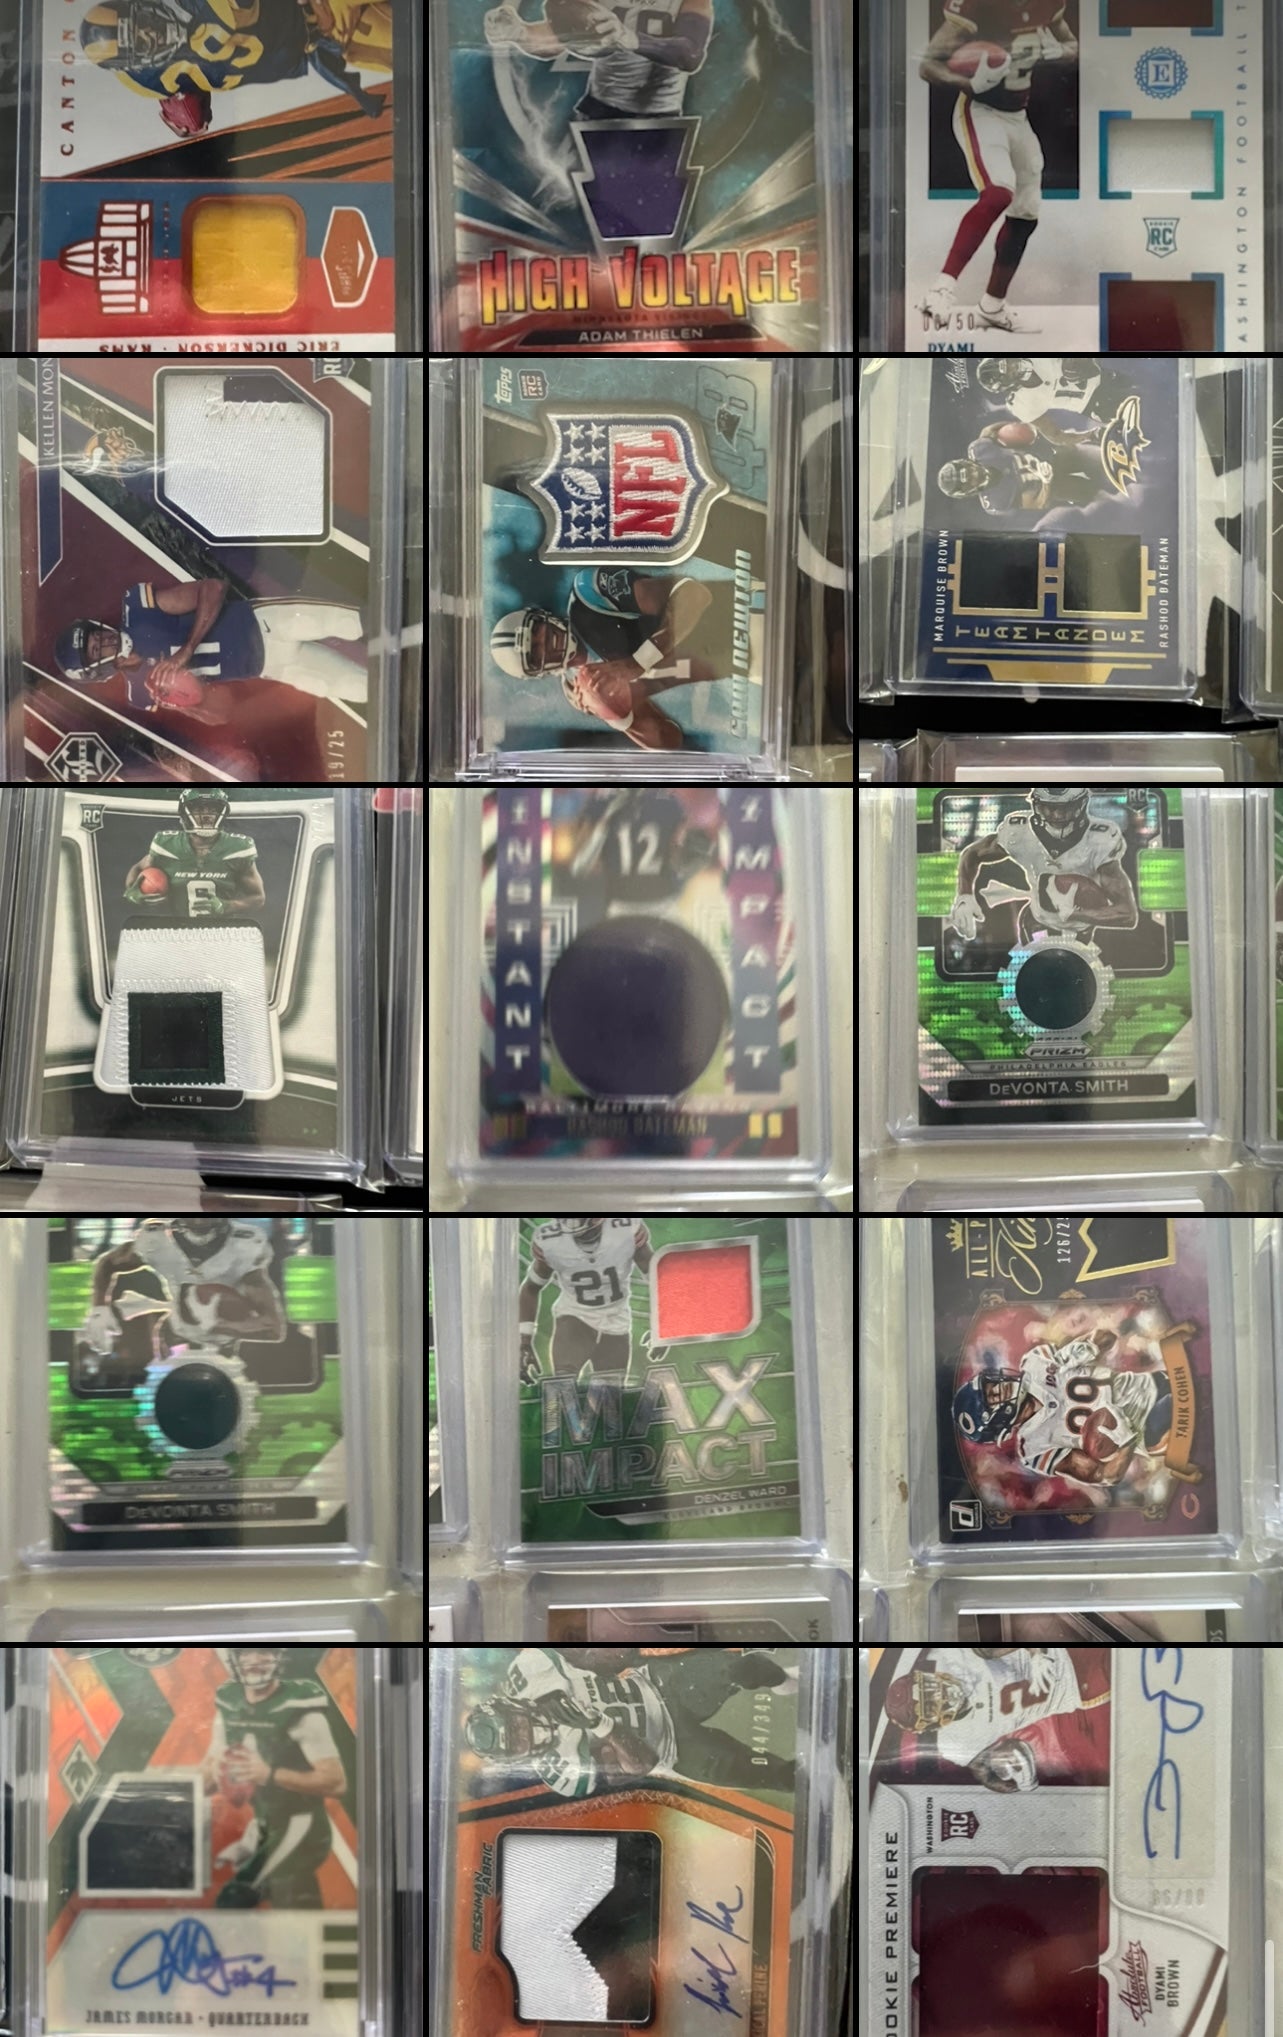 Football Mystery Max Pack